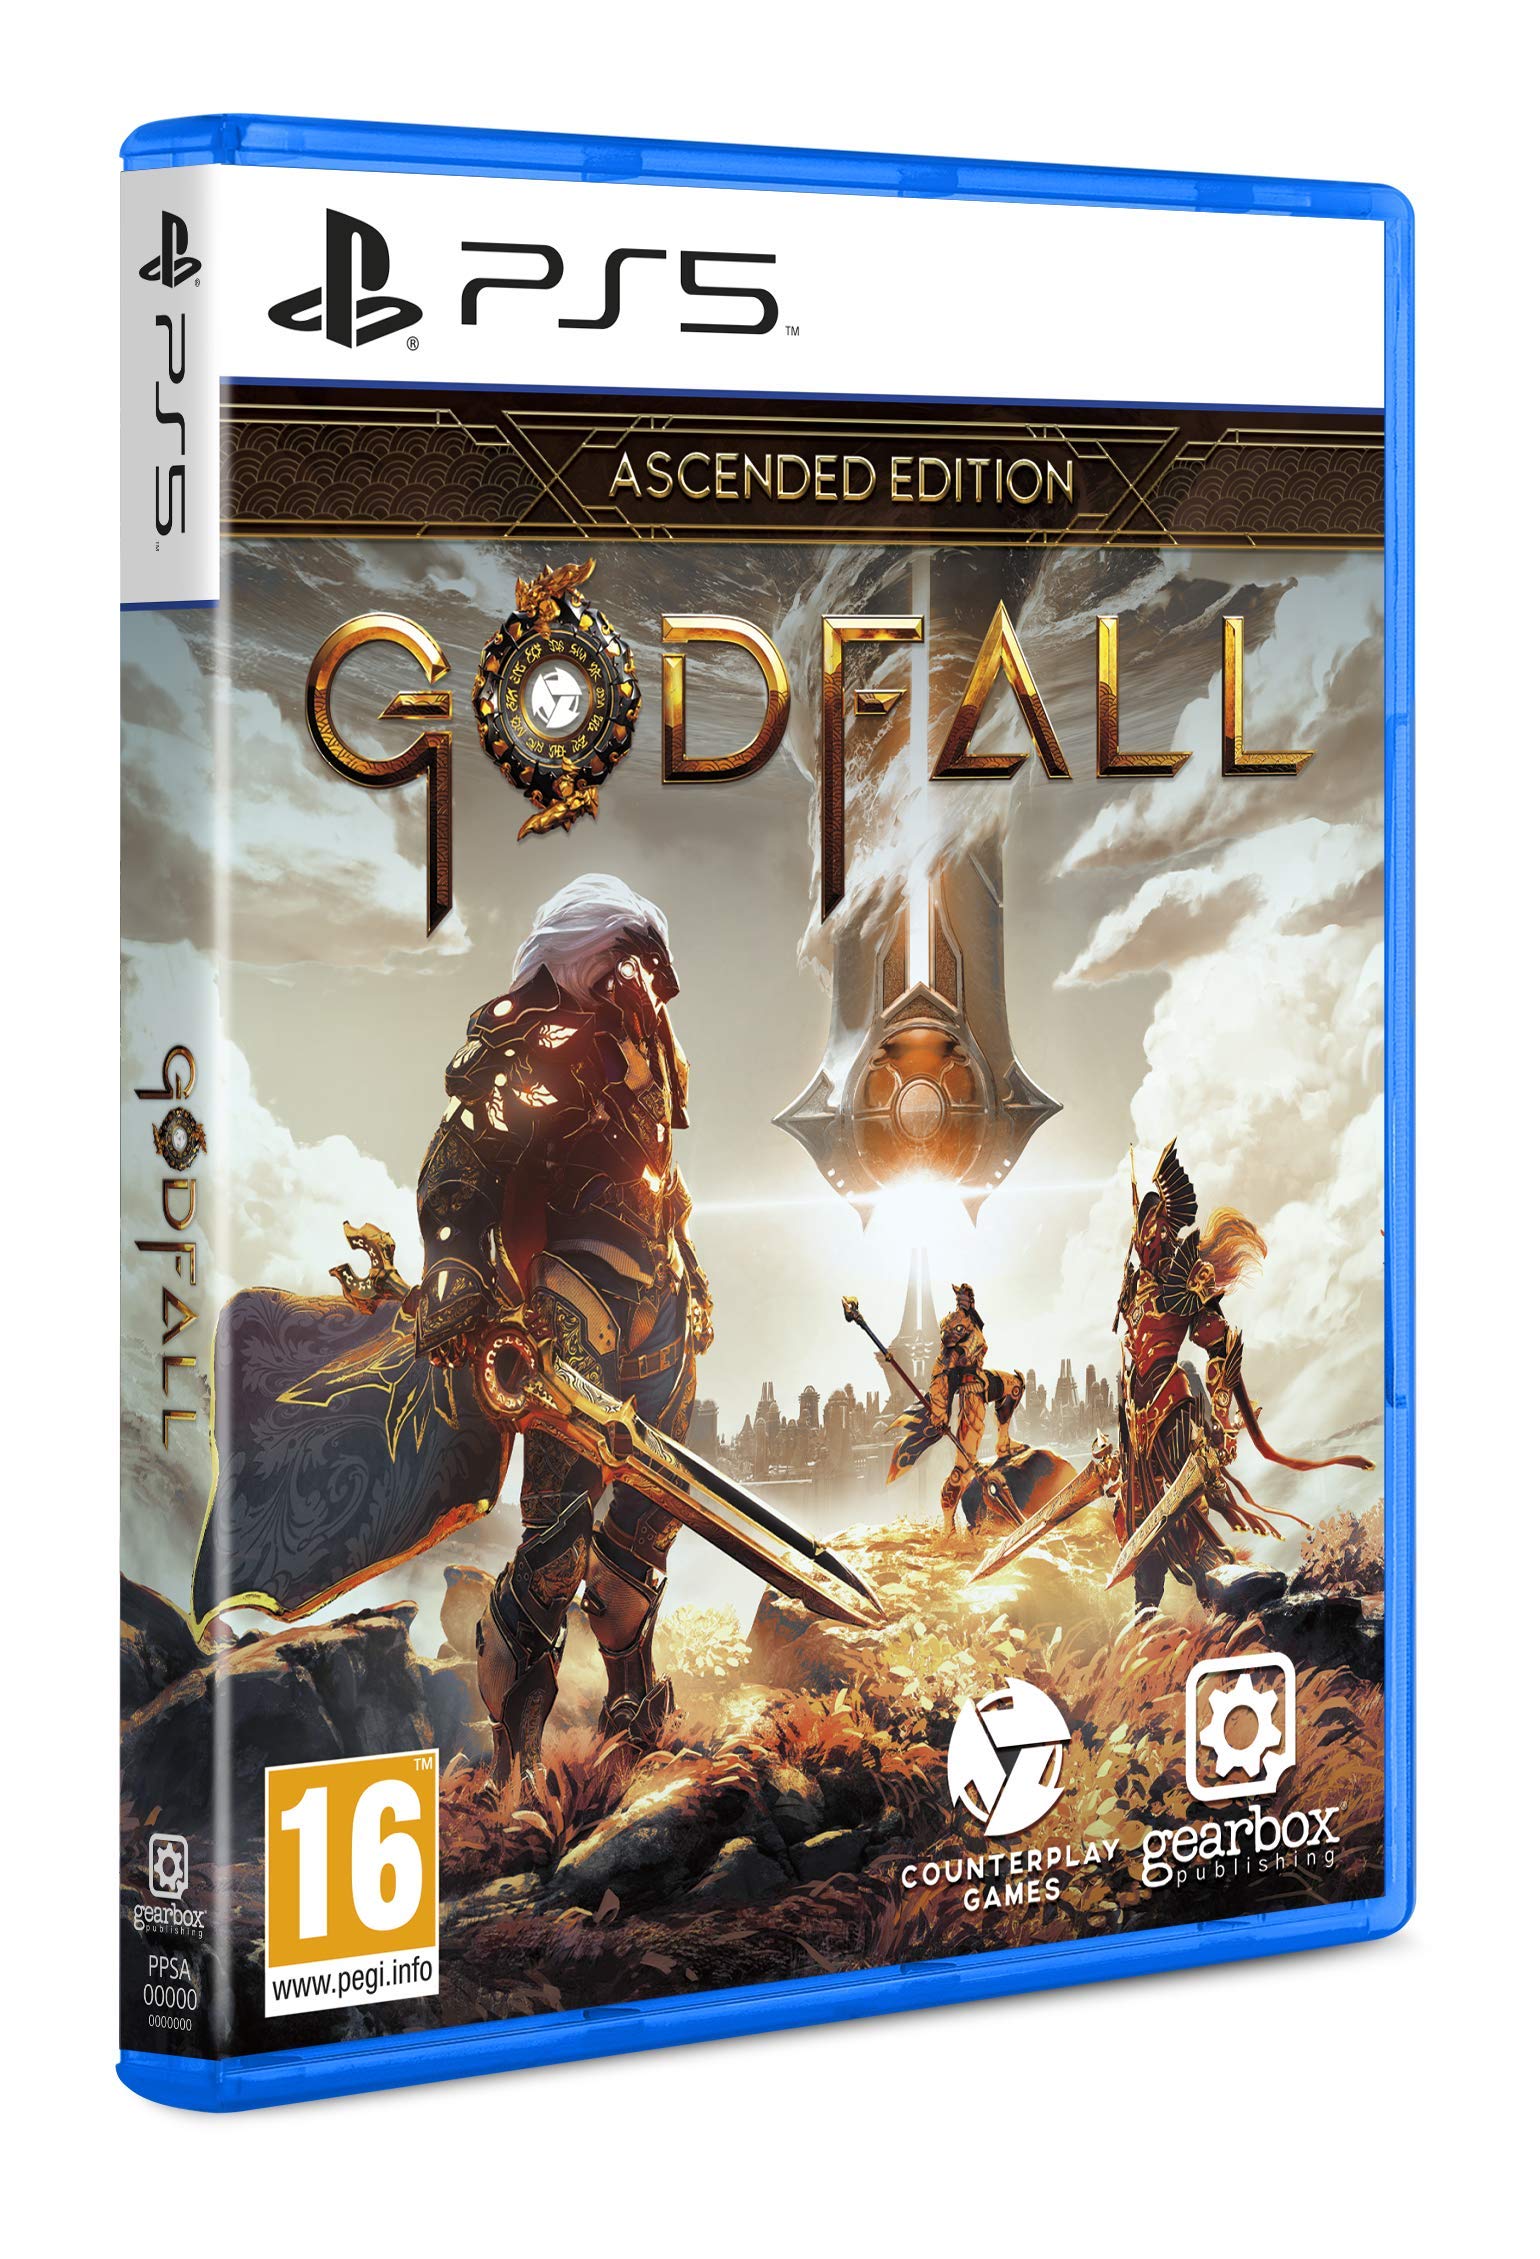 GEARBOX PUBLISHING Godfall (Ascended Edition), 5060760881740